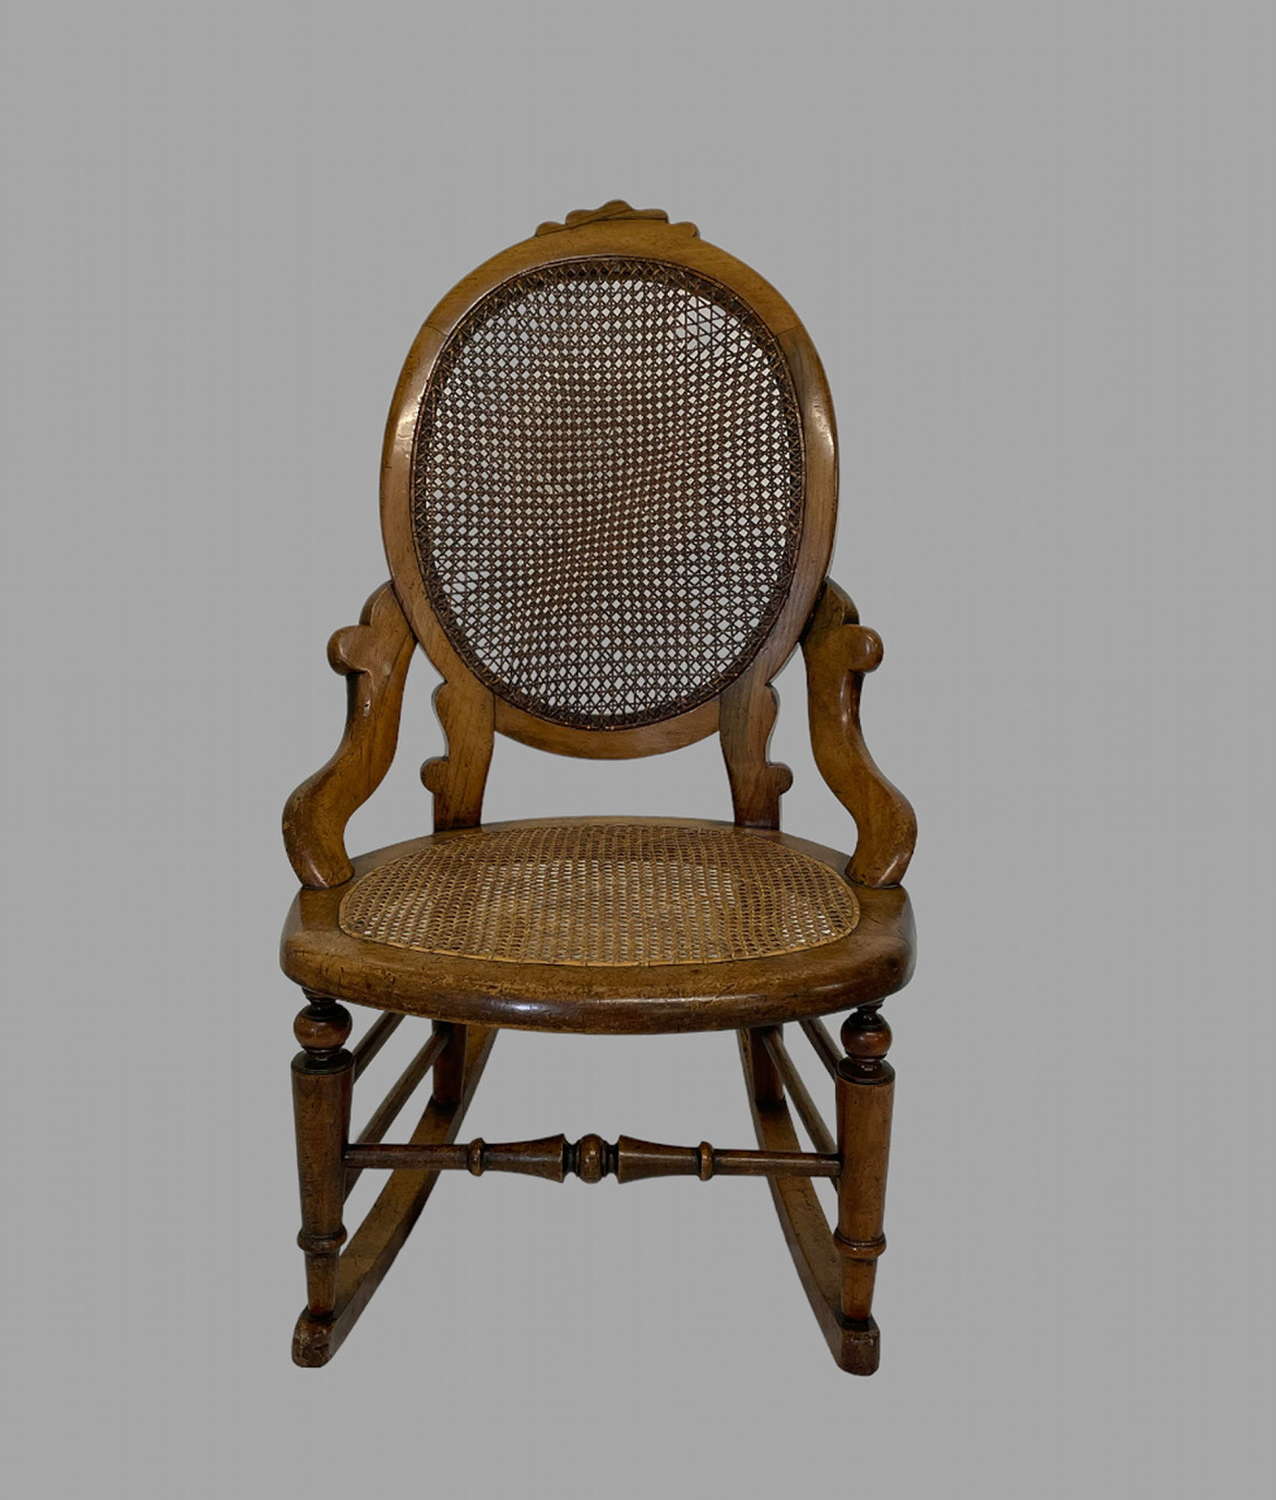 A Lovely Fruitwood Rocking Chair